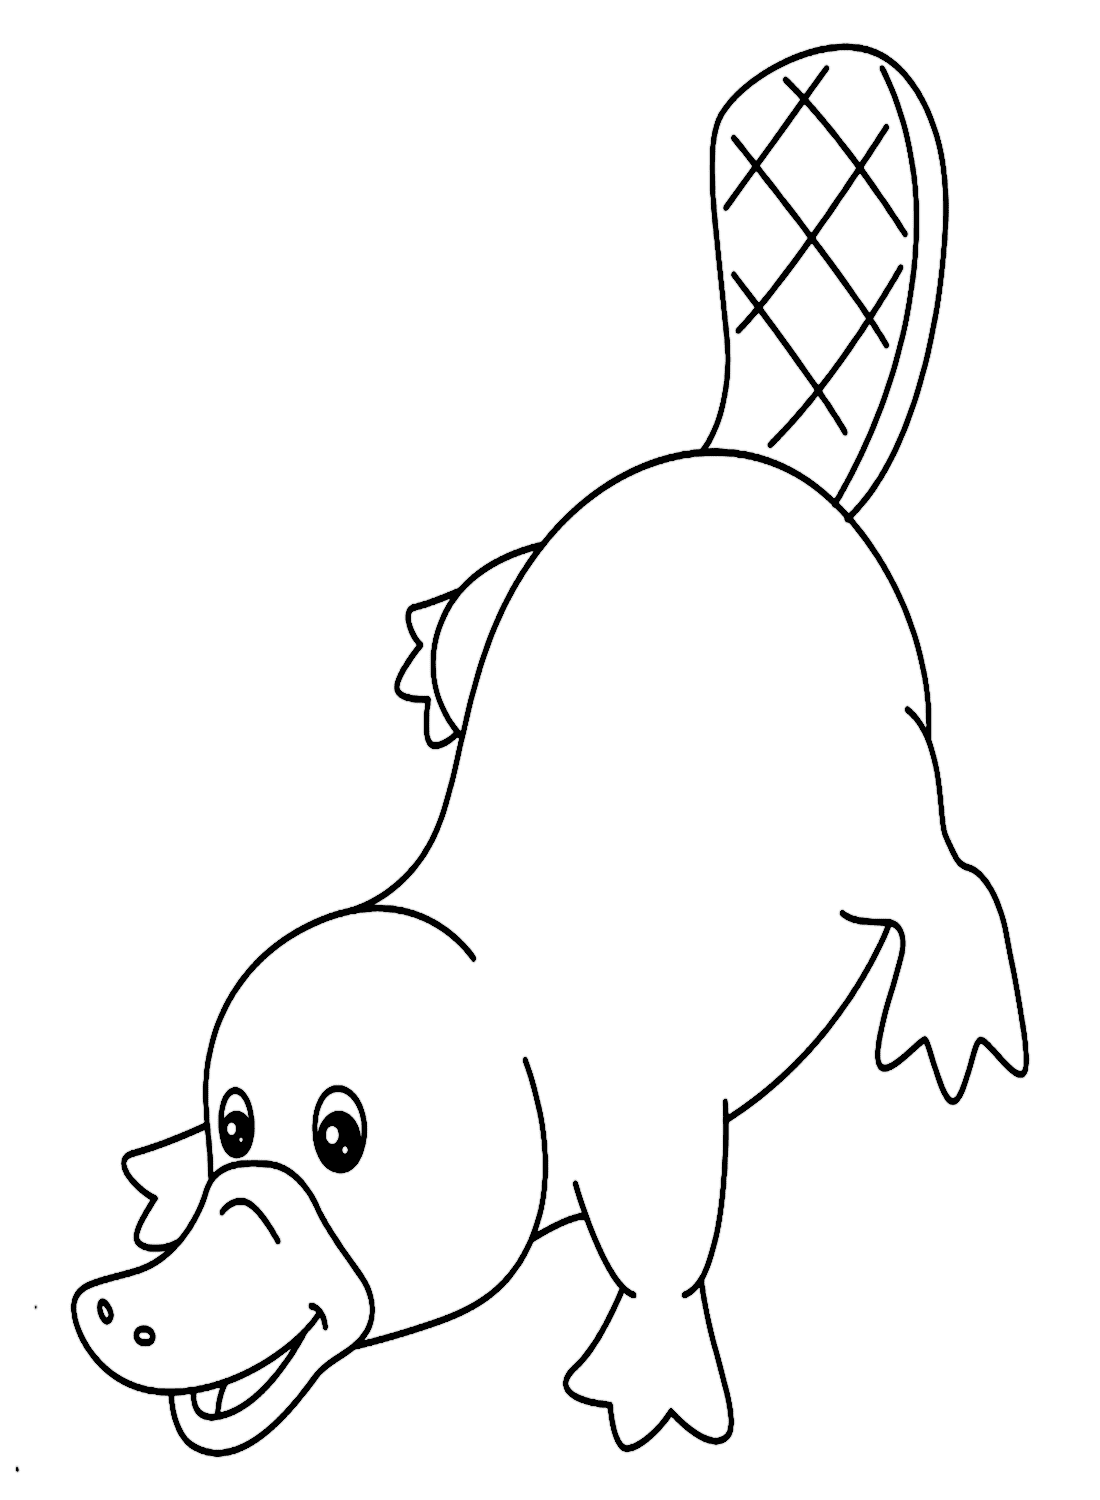 Platypus Outline from Platypus